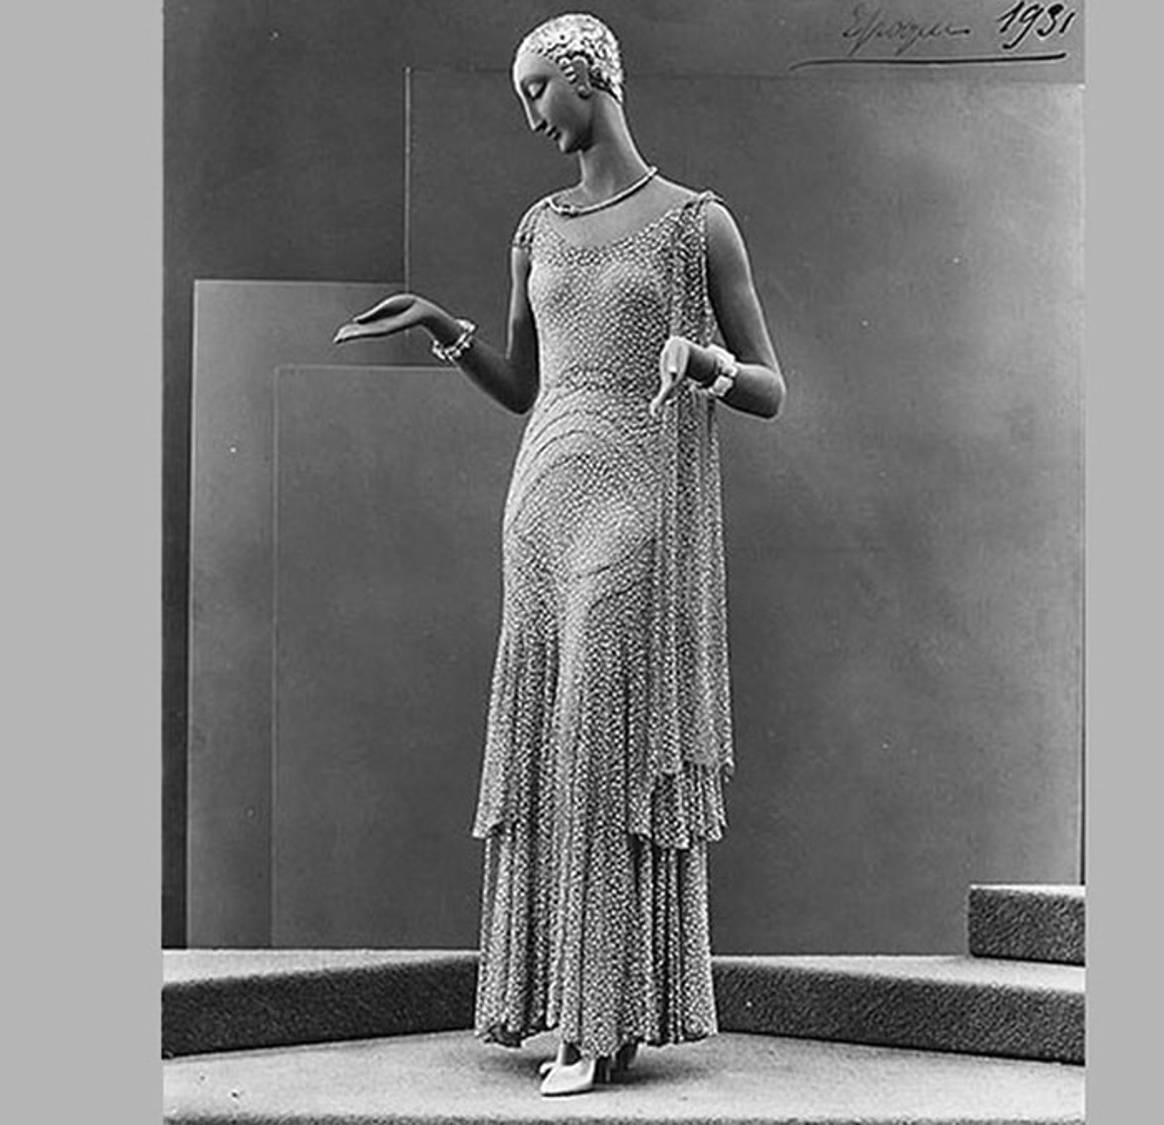 Fascinating Fashion Facts About the History of Mannequins